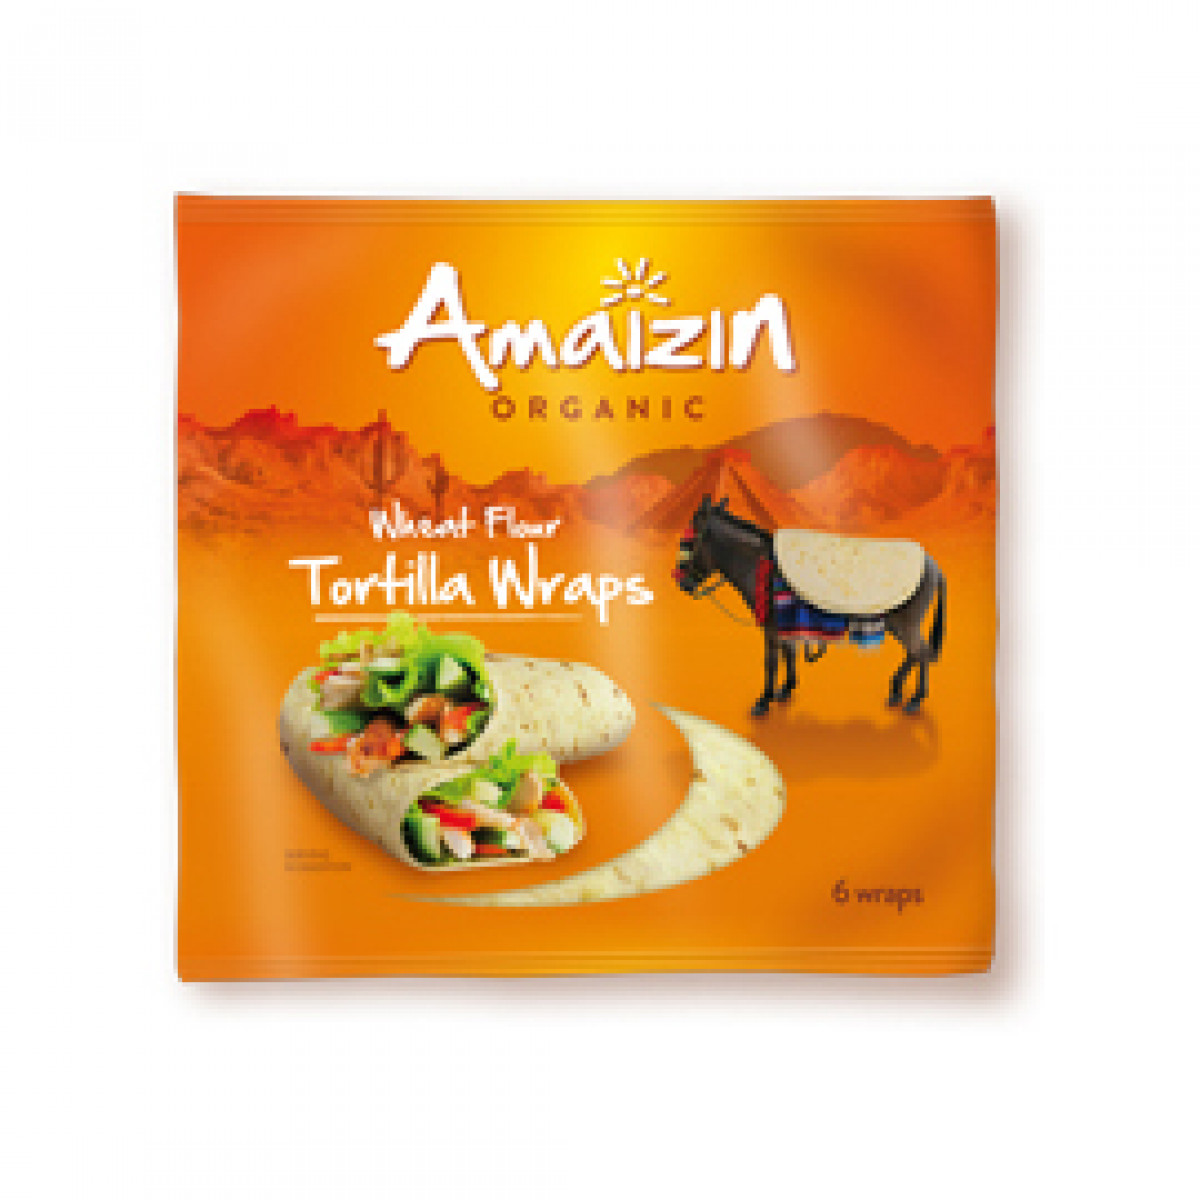 Product picture for Tortilla Wraps 20cm